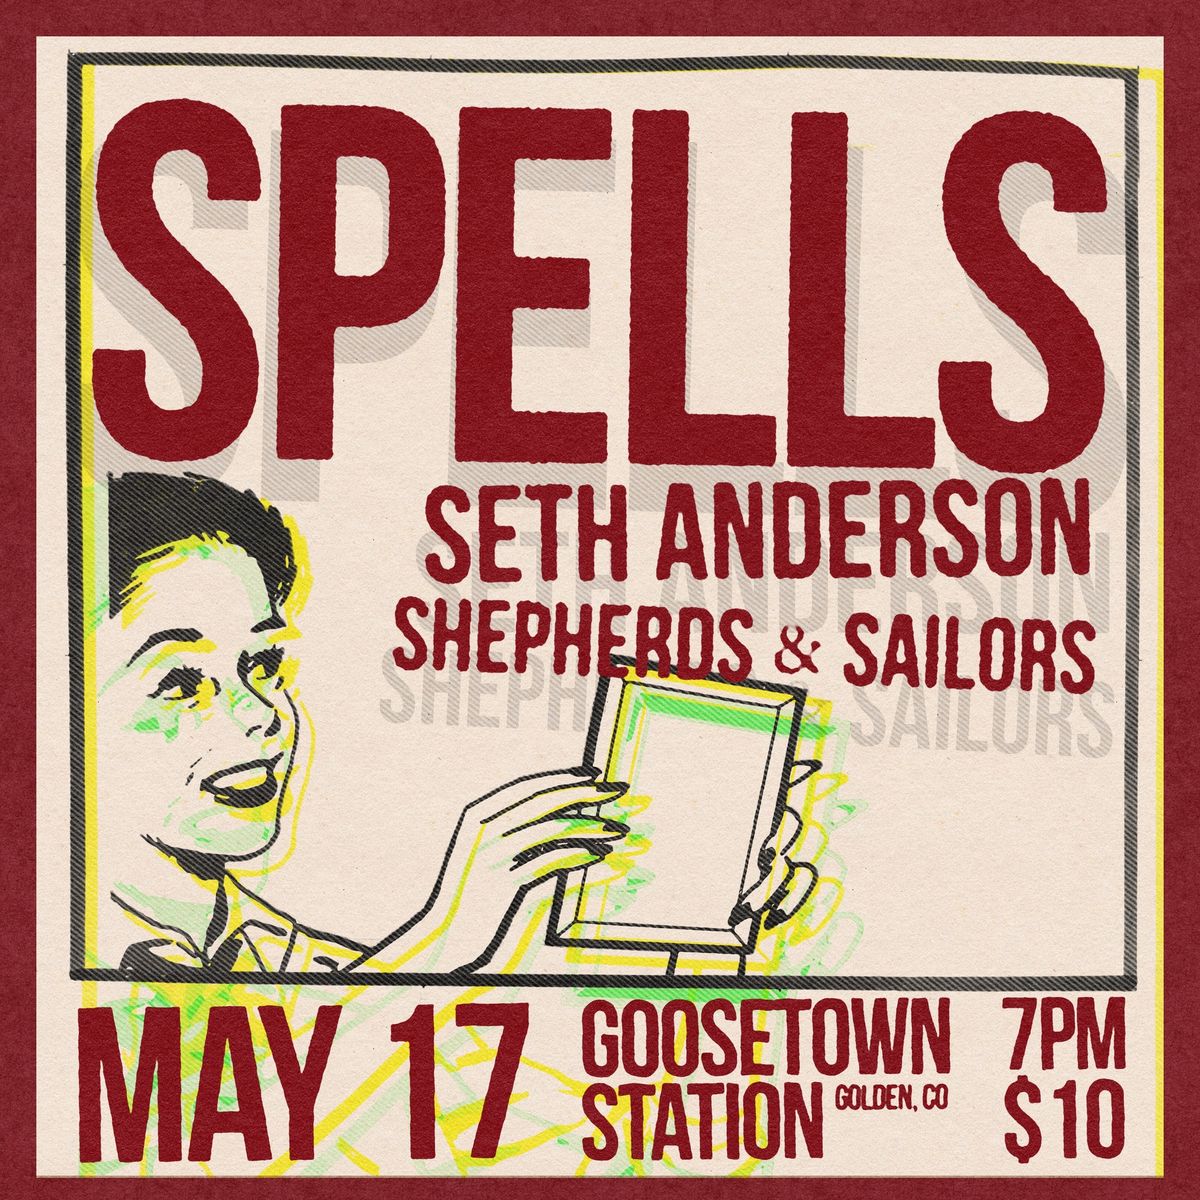 \ud83c\udfbc\ud83c\udf89\ud83d\udd25\ud83d\udda4 May 17. SPELLS ! with Seth Anderson & Shepherds & Sailors !!